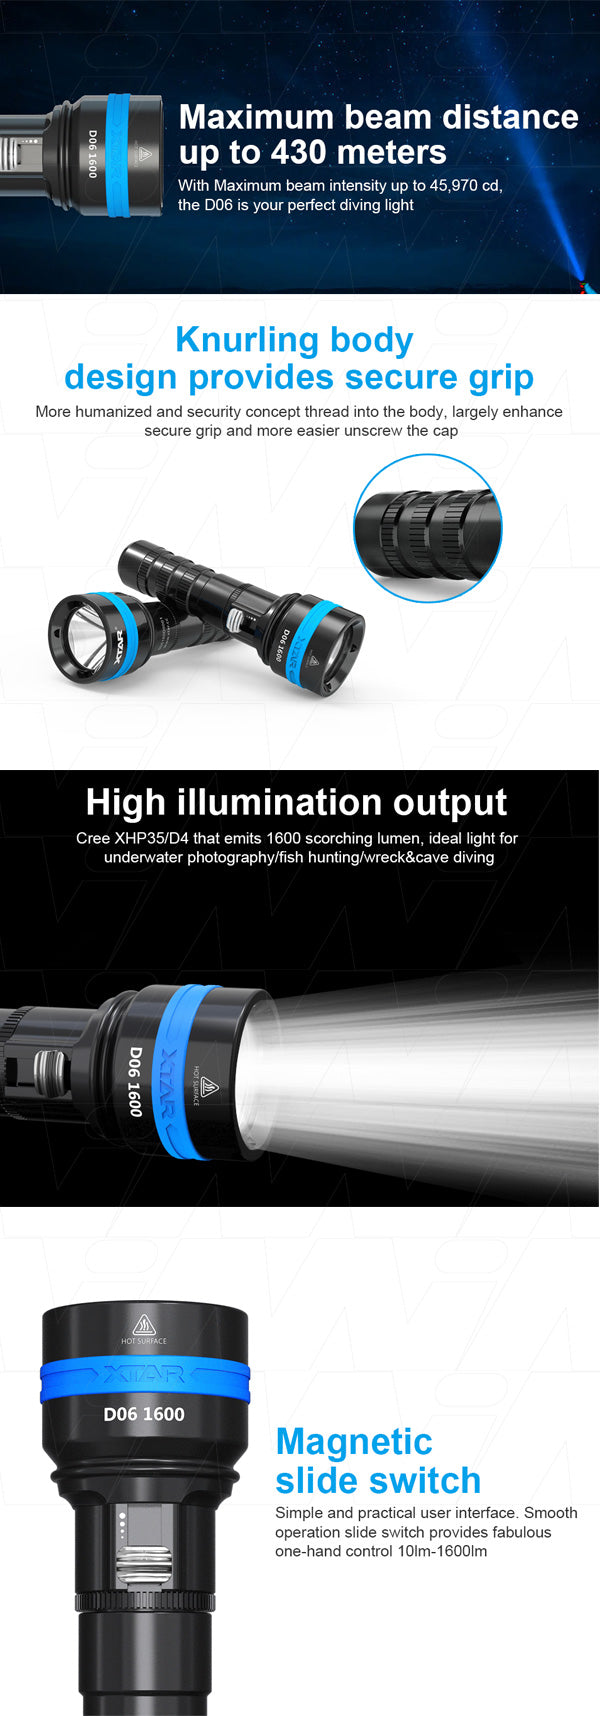 XTAR D06-1600 1600 lumen professional diving flashlight fitted with CREE LED complete with battery, AC & DC charger and accessories